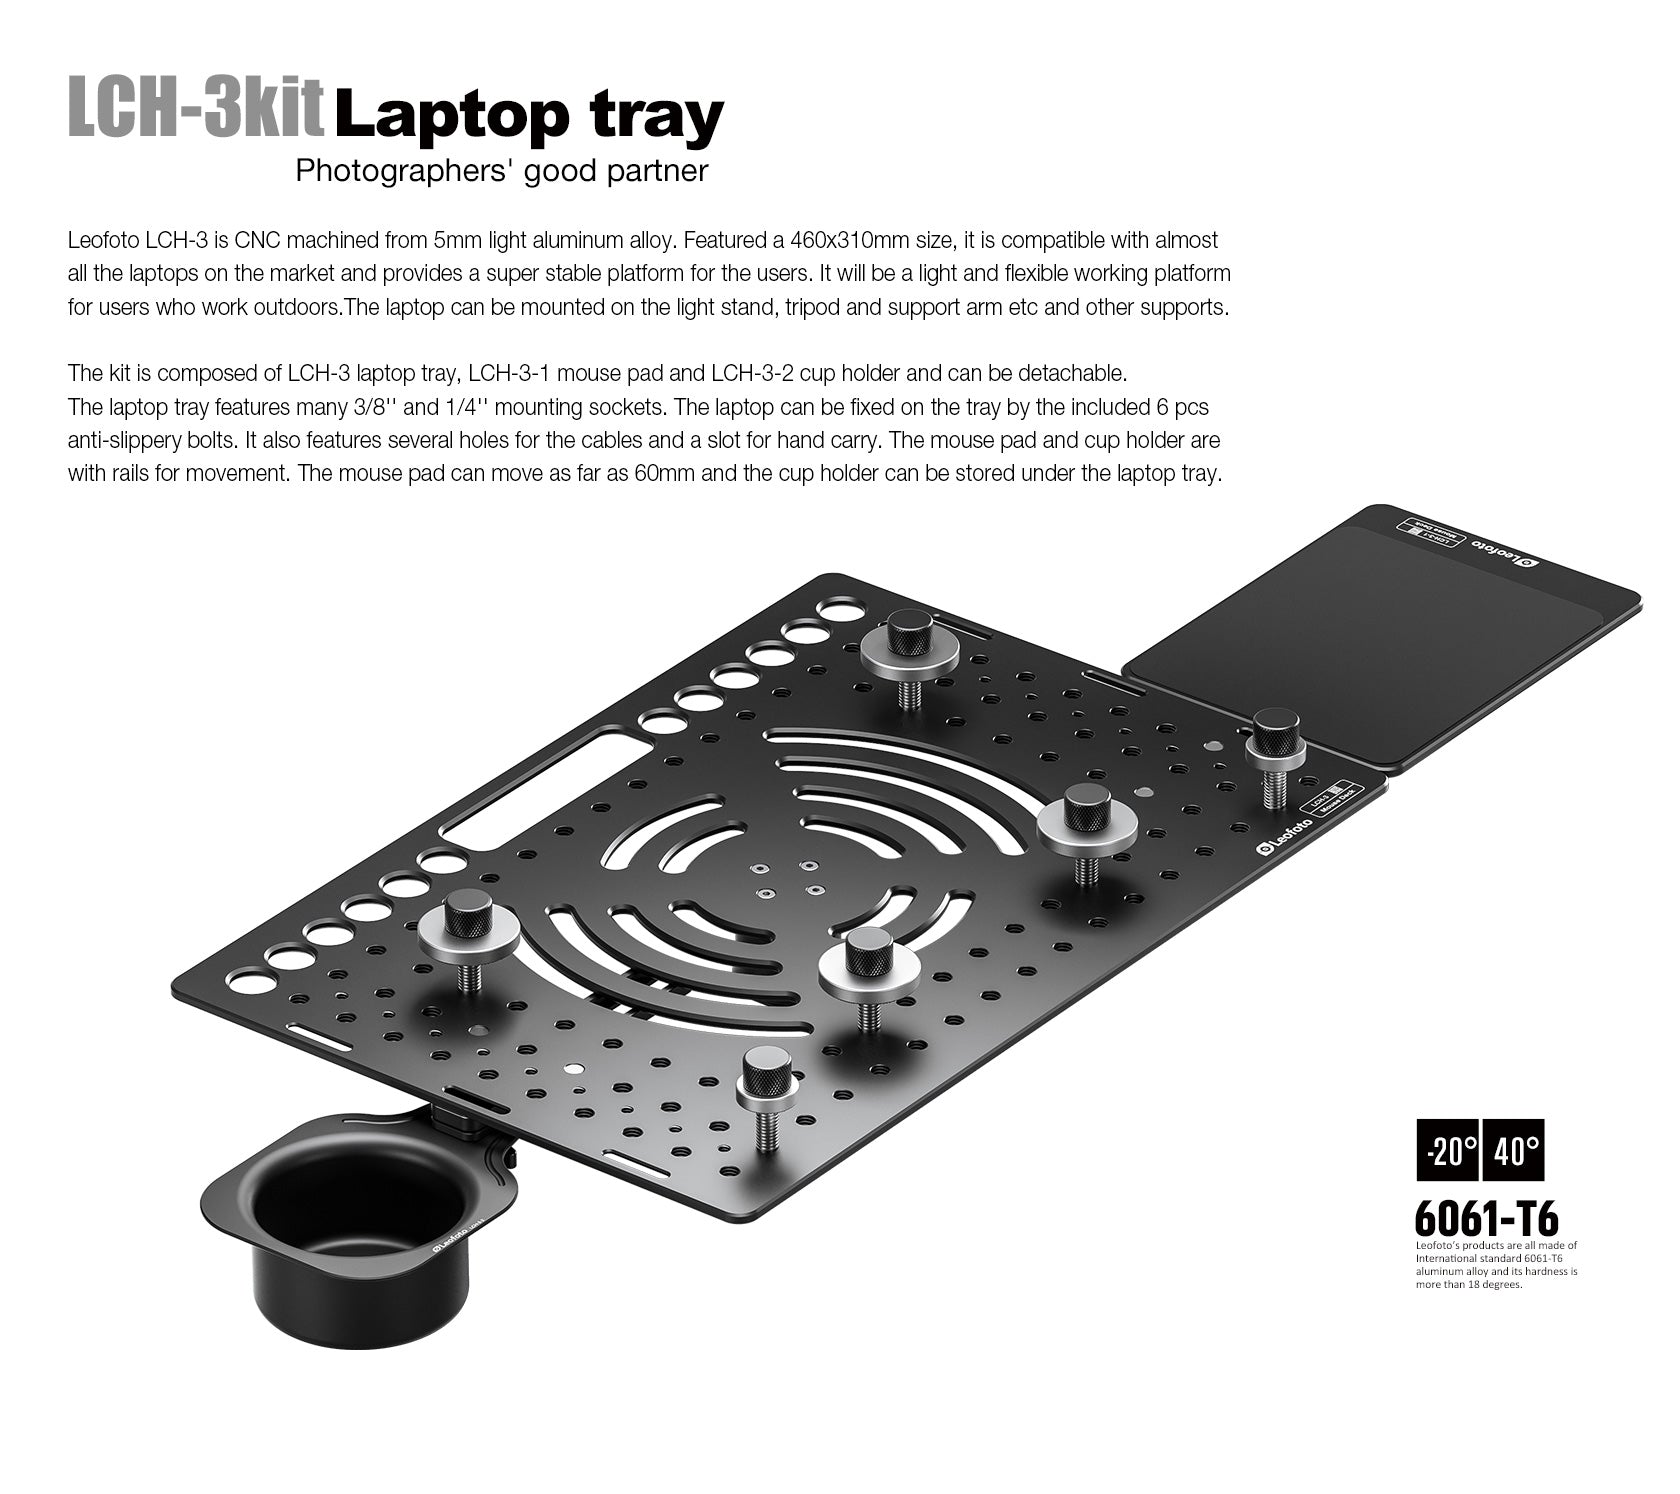 Leofoto LCH-3Kit Ultimate Laptop Tray Kit | 1/4" and 3/8" Compatible